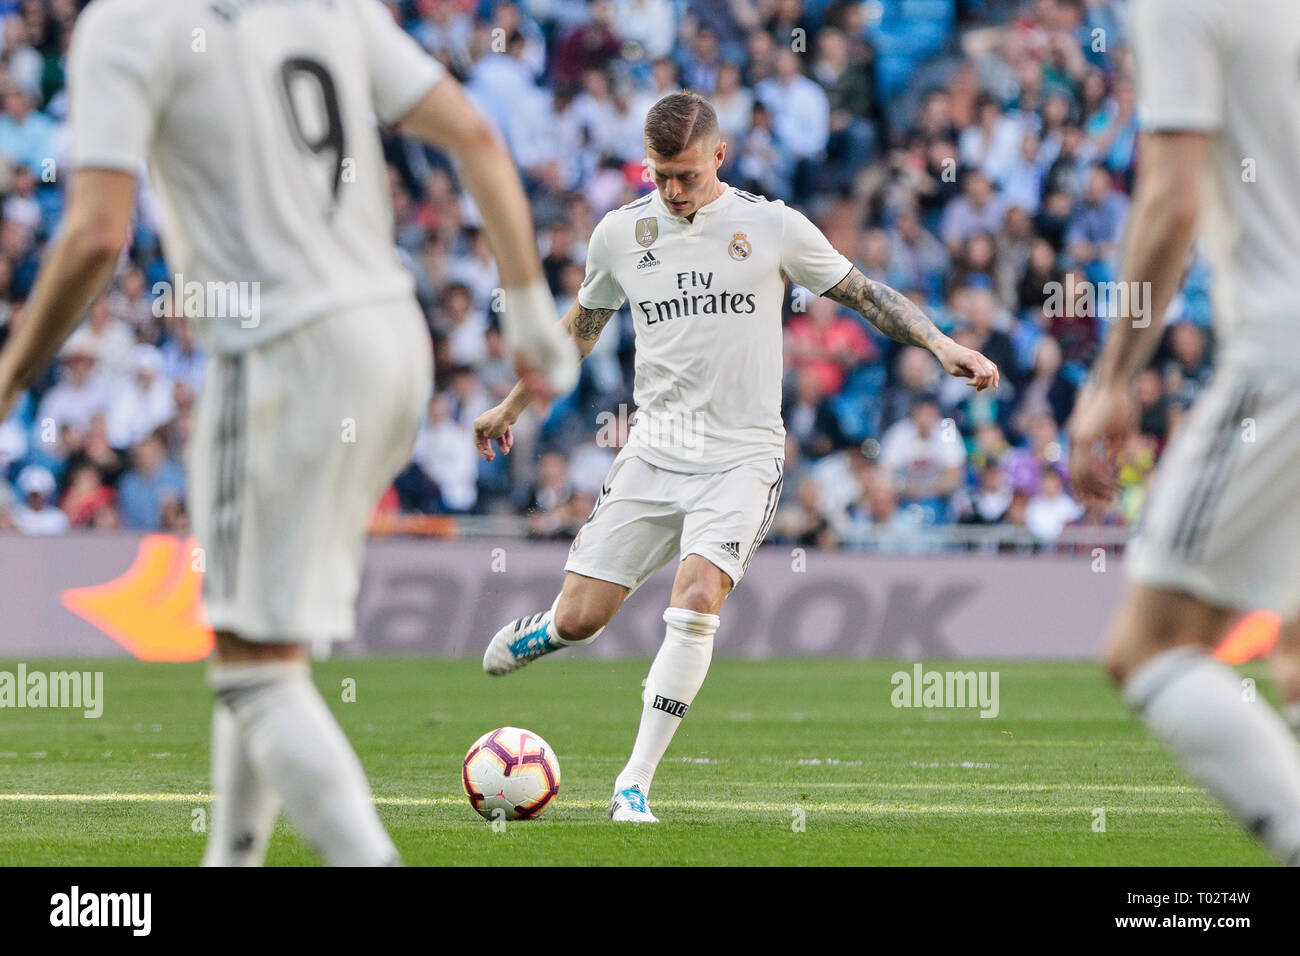 Madrid, Spain. 16th March 2019. Real Madrid's Toni Kroos seen in action during La Liga match between Real Madrid and Real Club Celta de Vigo at Santiago Bernabeu Stadium in Madrid, Spain. Credit: SOPA Images Limited/Alamy Live News Stock Photo